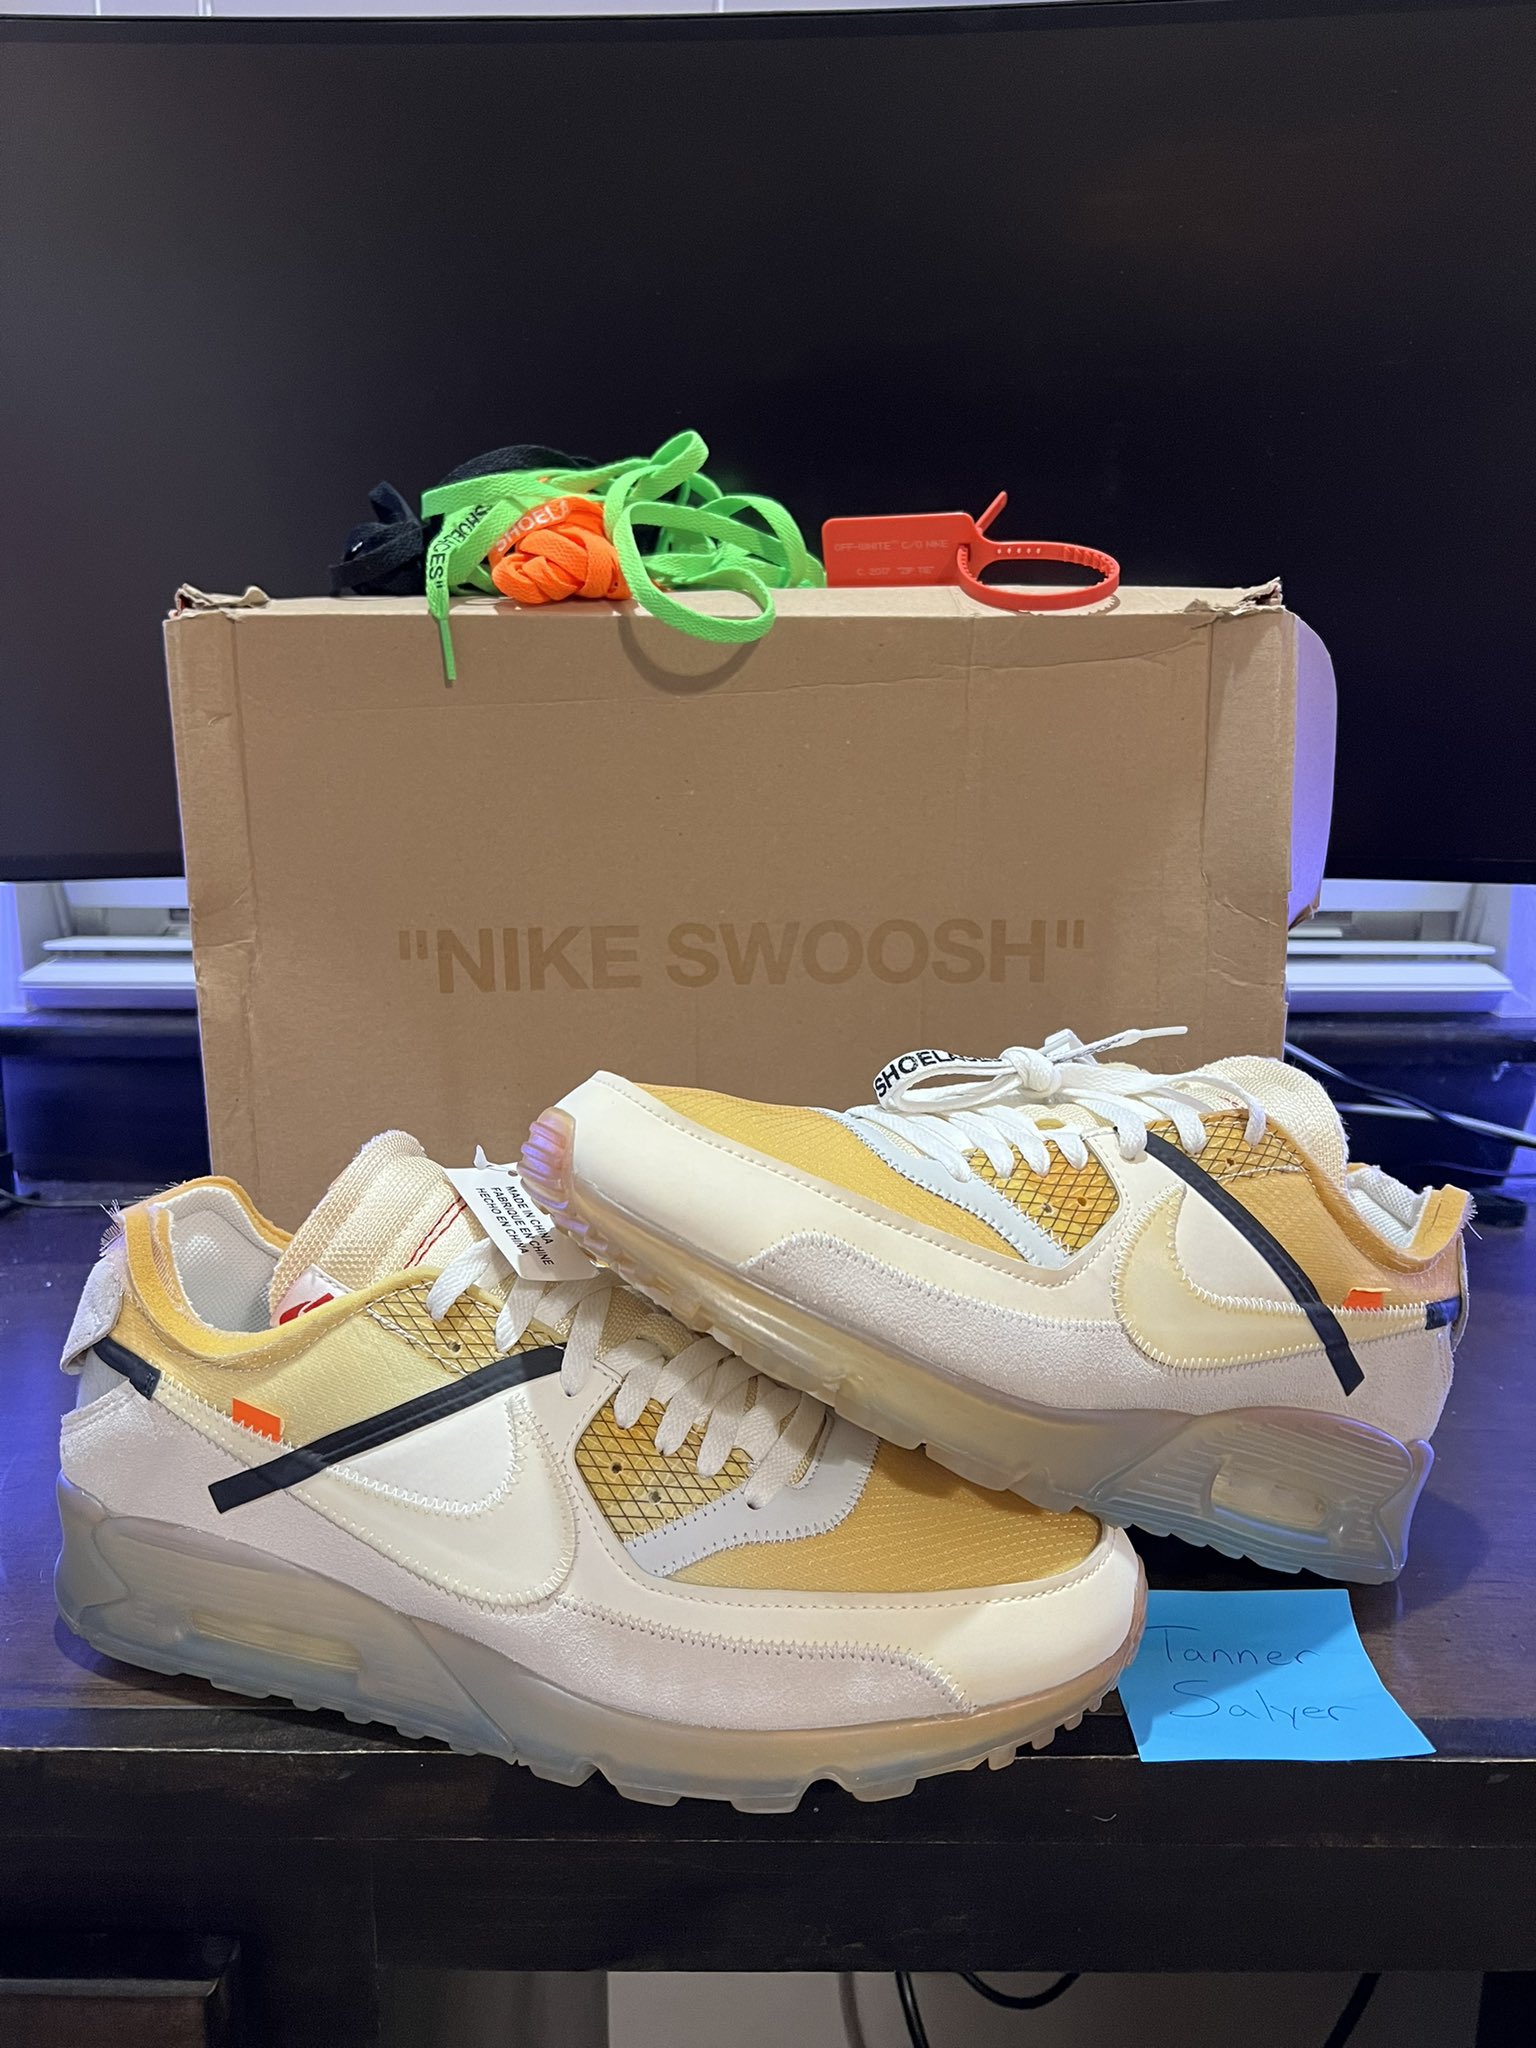 Ovrnundr on X: "Someone purchased an authentic pair Off-White x Nike Air Max 90 “The Ten” from Grailed $71 dollars. The pair features yellowing from age/time. Would you purchase